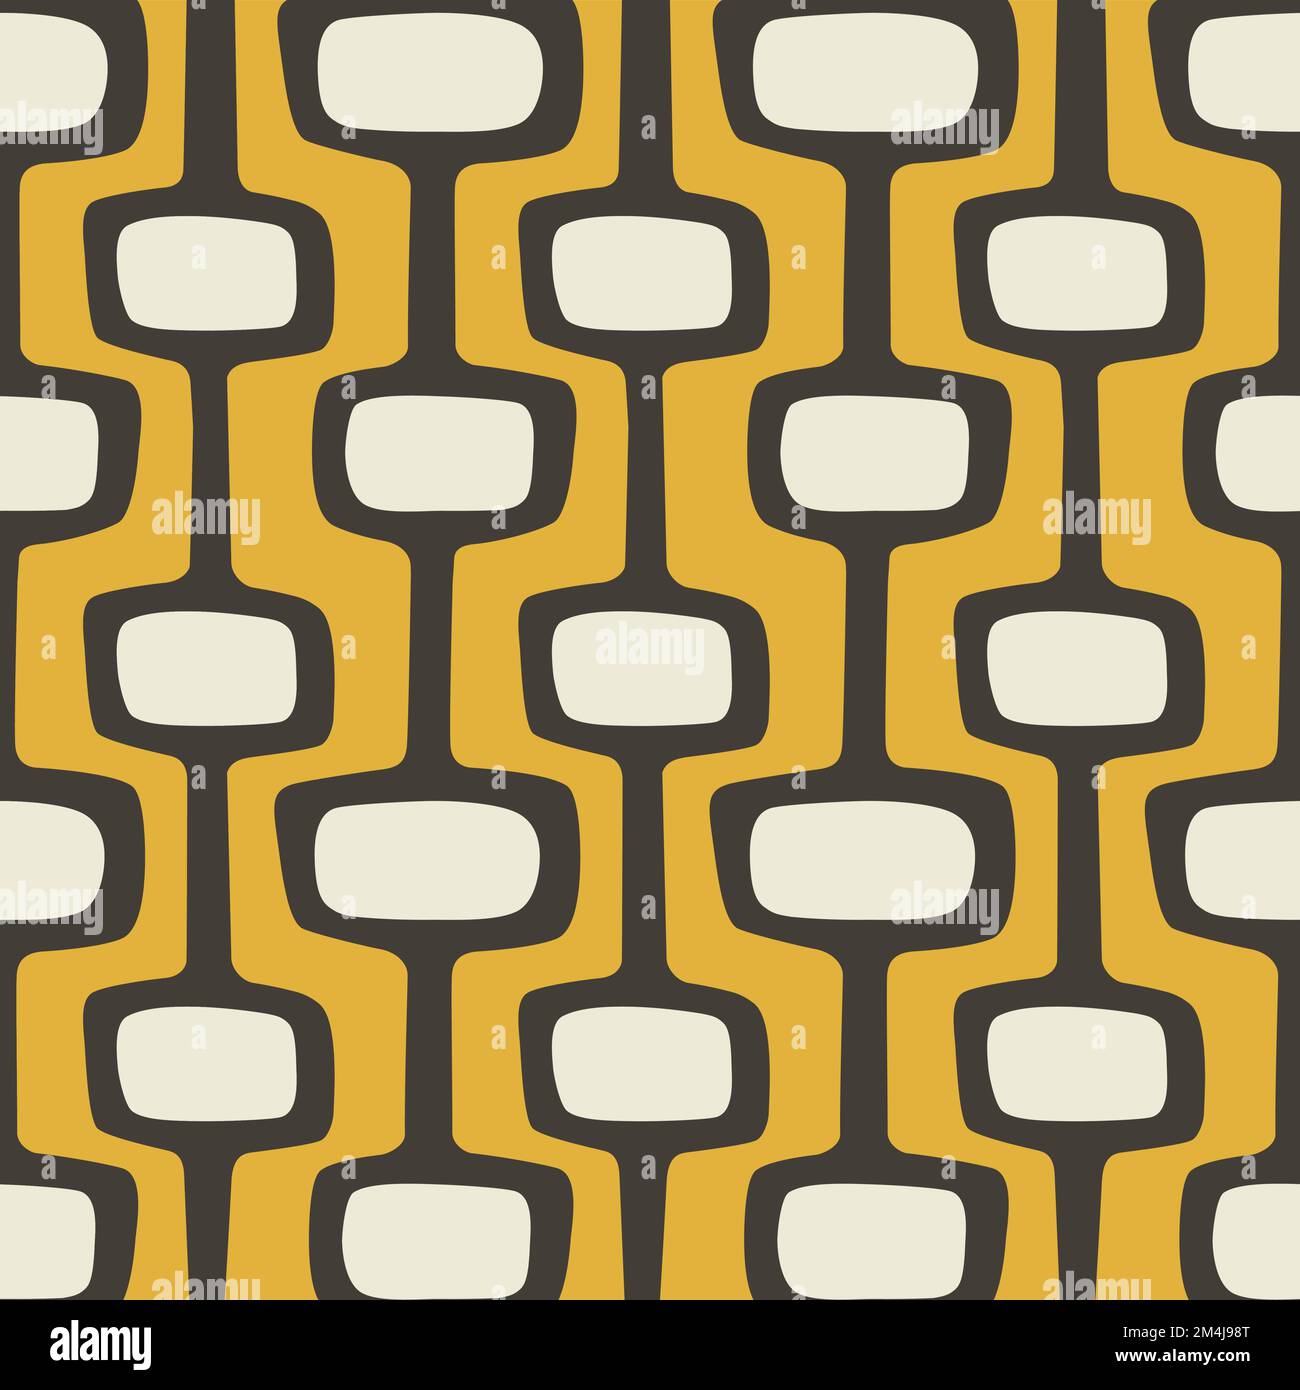 Mid-century modern atomic age background in mustard gold, cream dark brown. Ideal for wallpaper and fabric design. Stock Vector